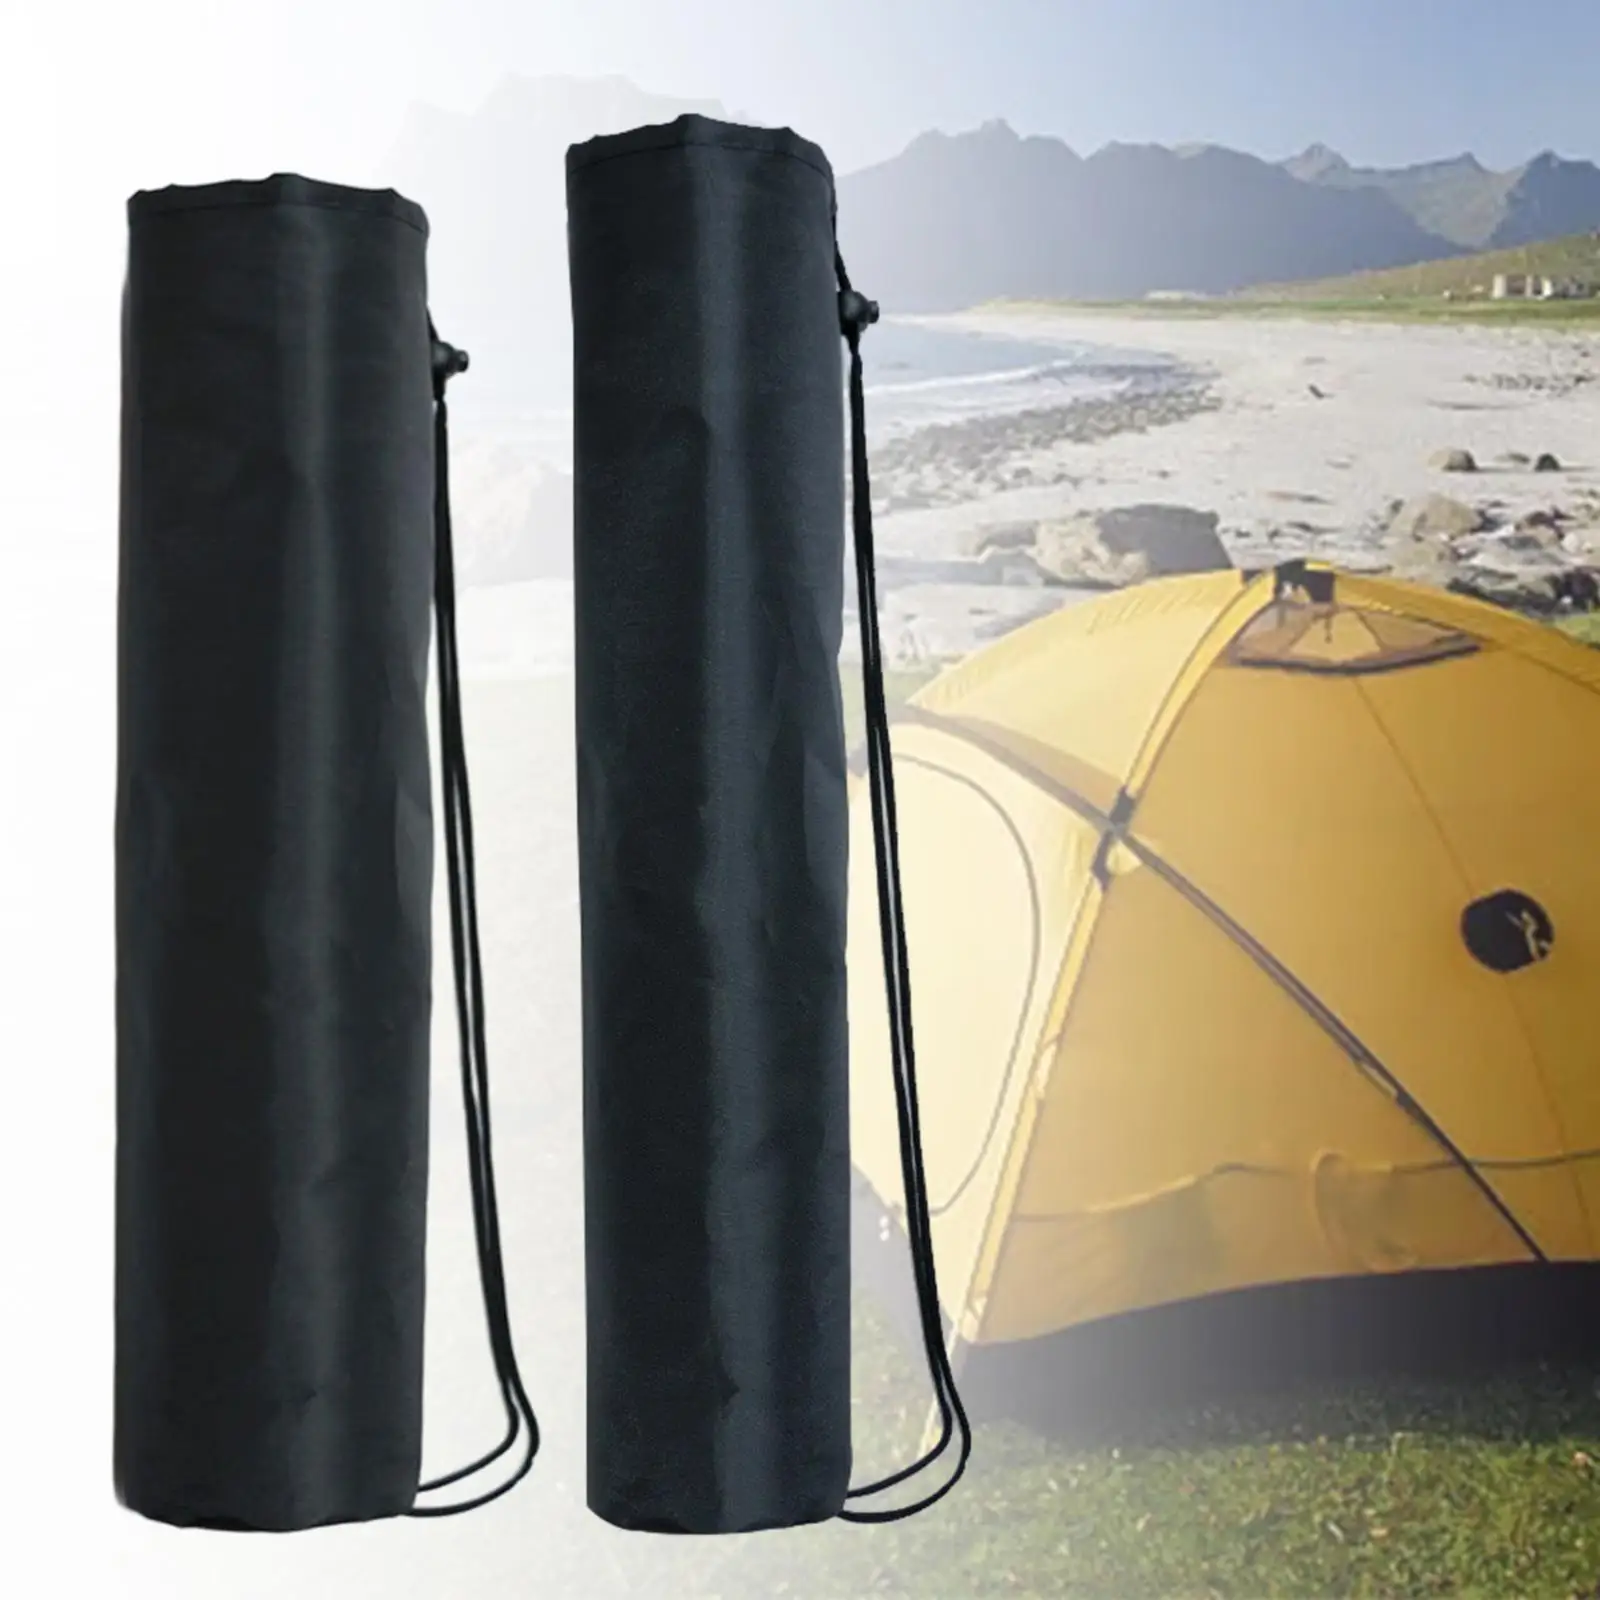 Tent Storage Bag Luggage Lightweight Portable Tent Pole Bag Tent Accessories Carrying Bag for Trekking Outdoor Travel Trips BBQ